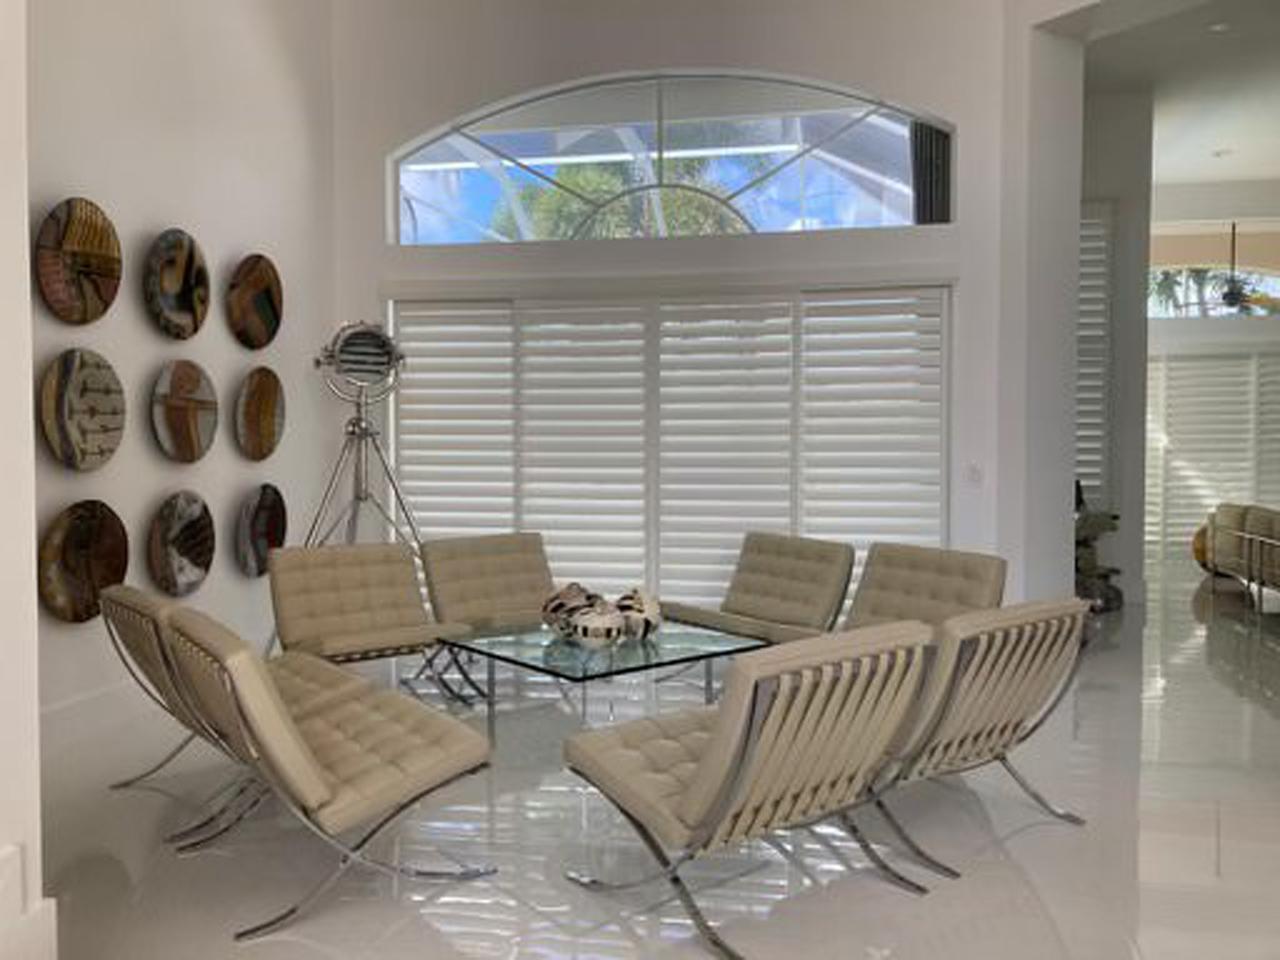 Dining room with interior shutters on sliding glass door